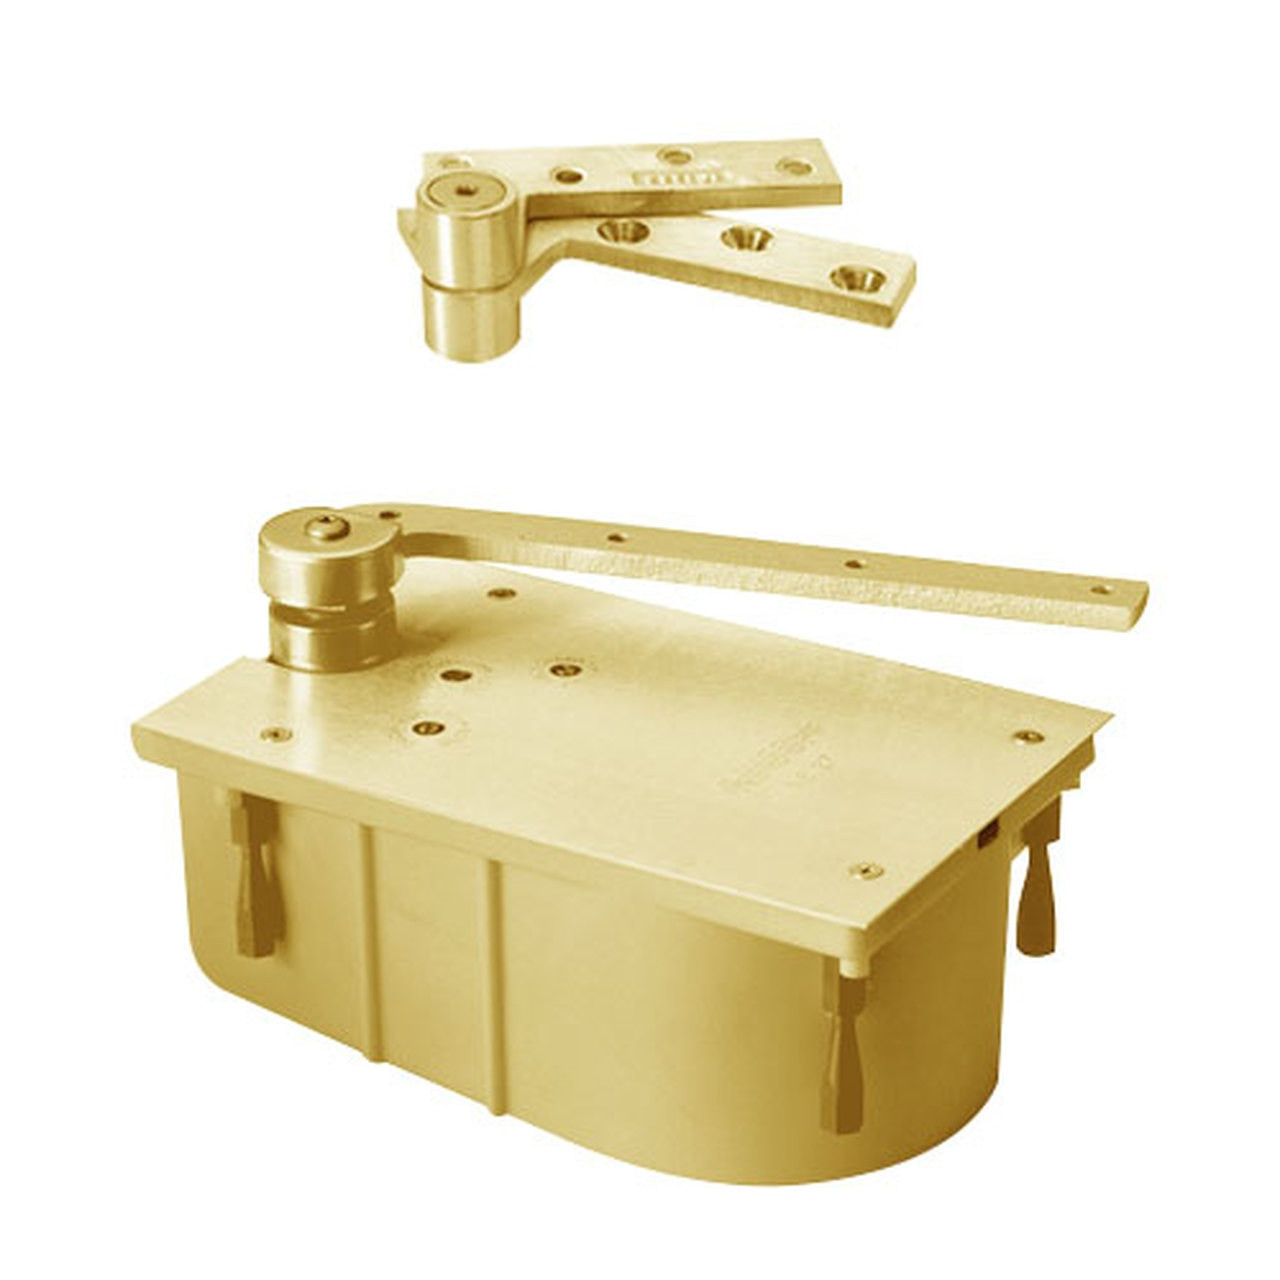 F127-95N-LFP-LCC-RH-606 Rixson 27 Series Fire Rated Heavy Duty 3/4" Offset Hung Floor Closer in Satin Brass Finish